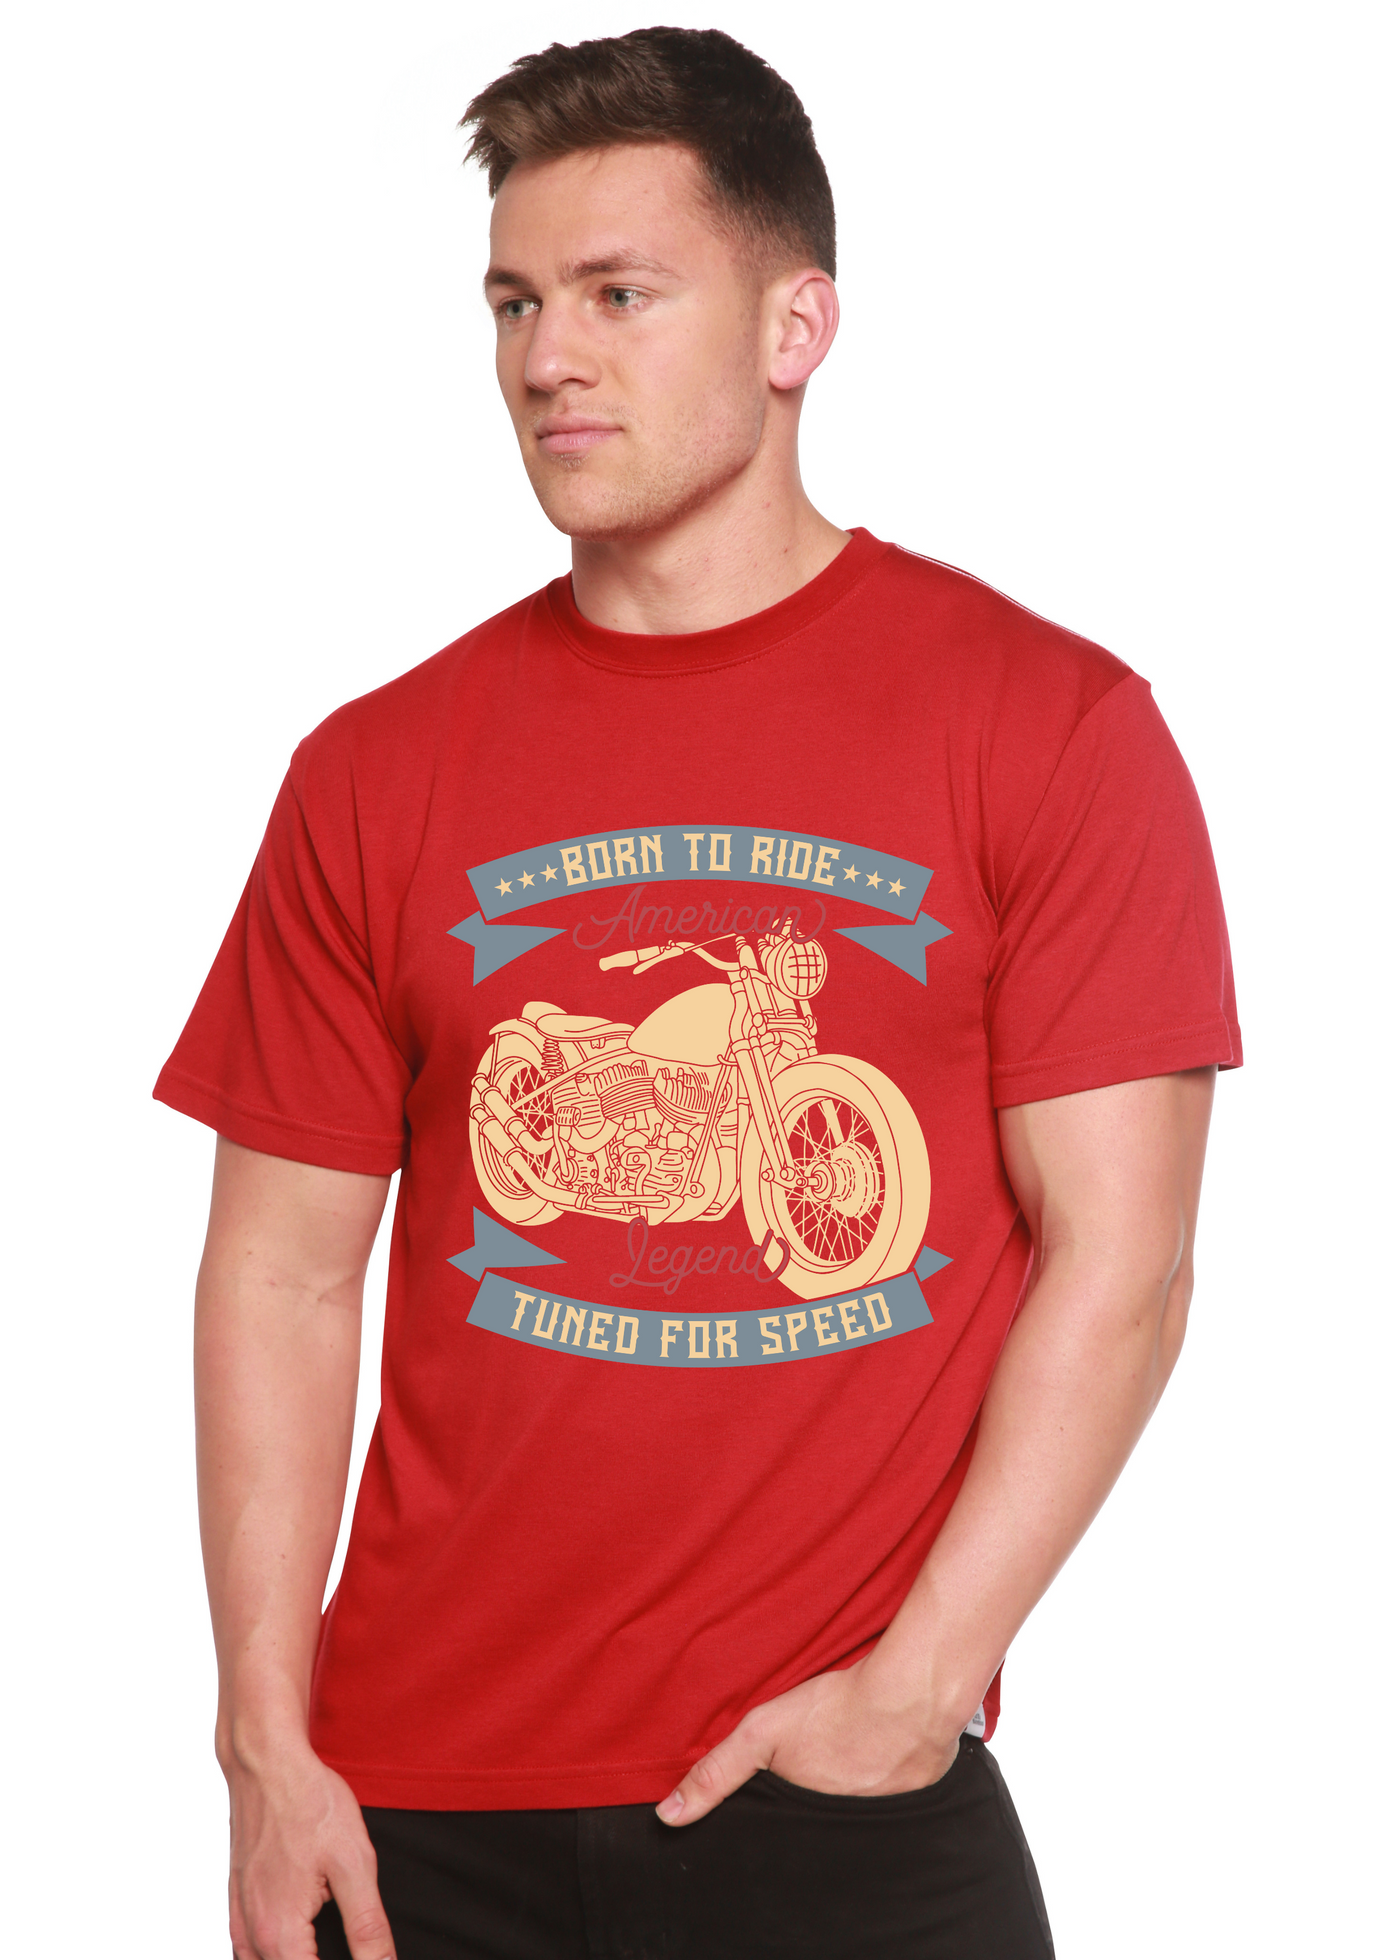 Born To Ride American Legend men's bamboo tshirt pompeian red